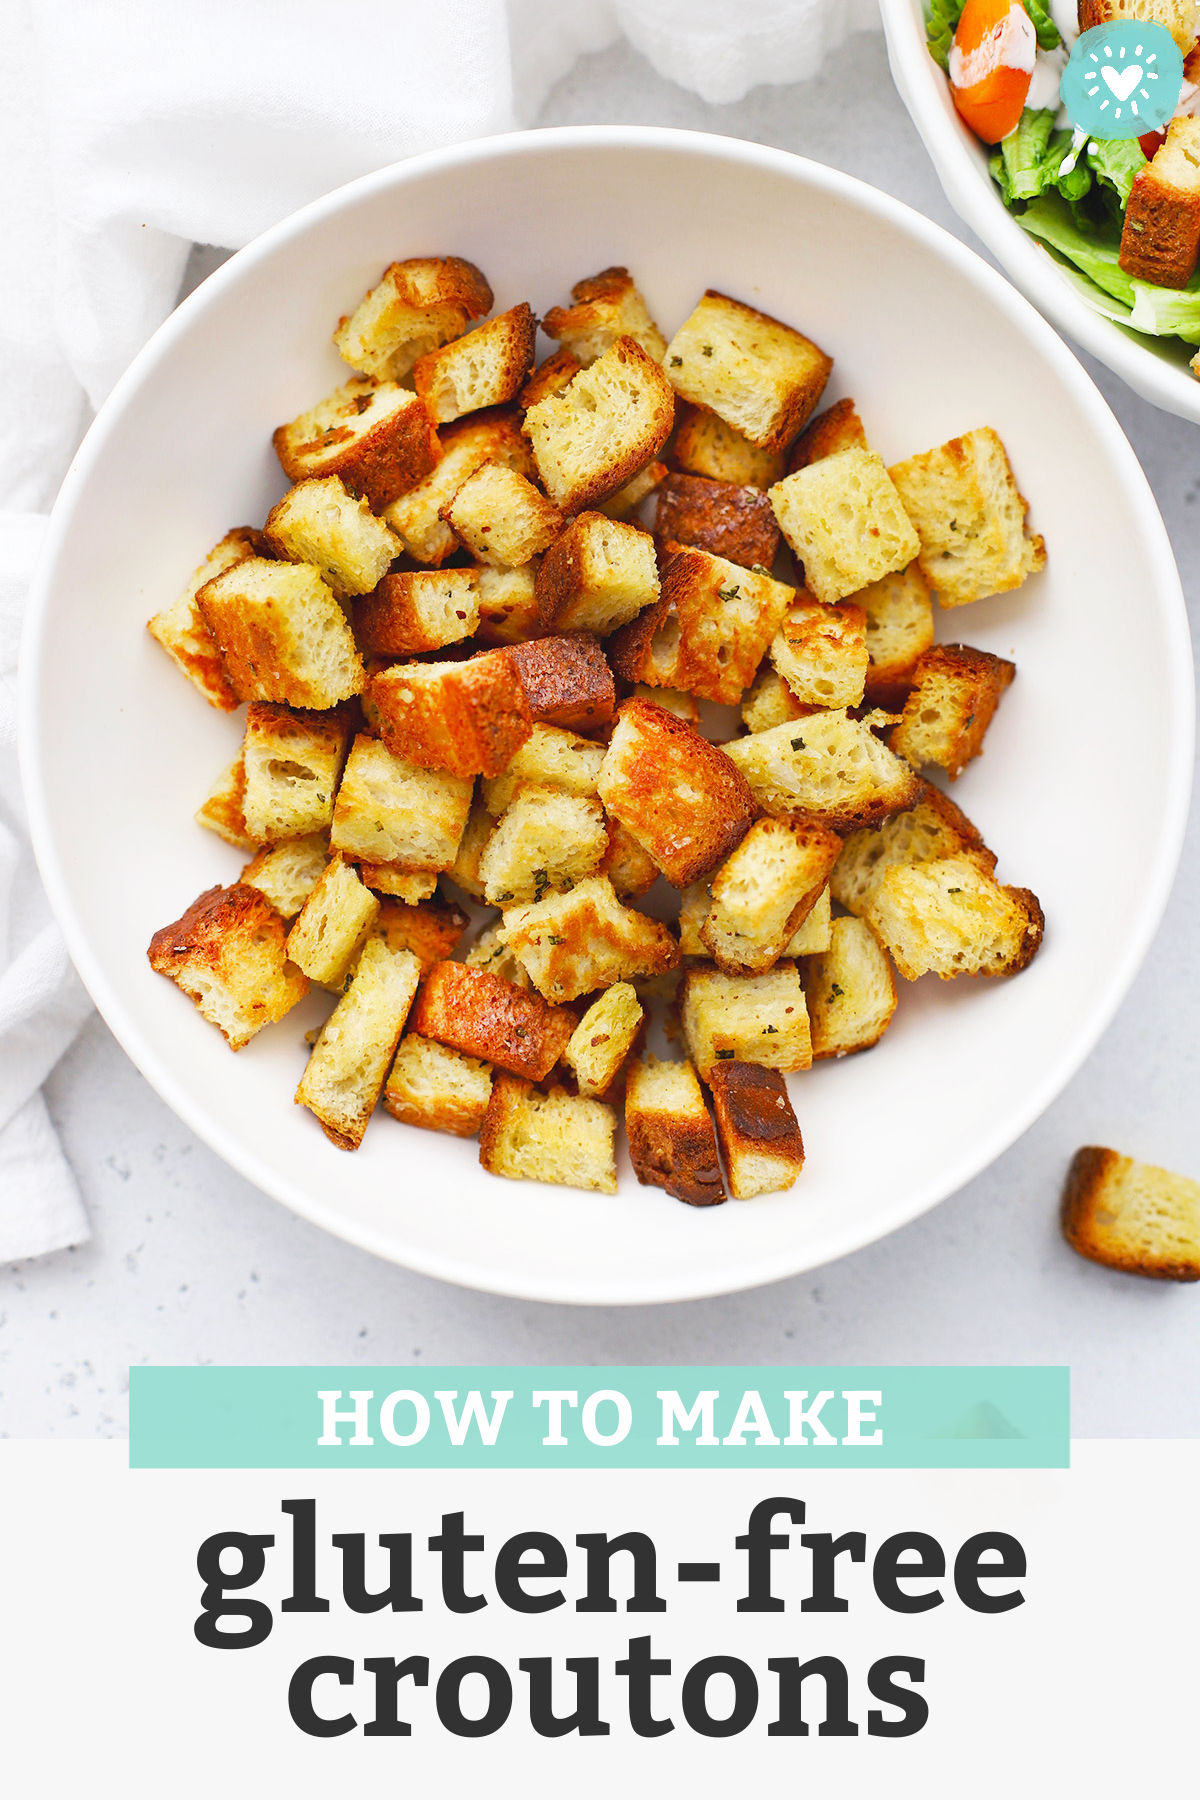 Gluten Free Croutons in a bowl next to salad with text overlay that reads "How to Make Gluten-Free Croutons"